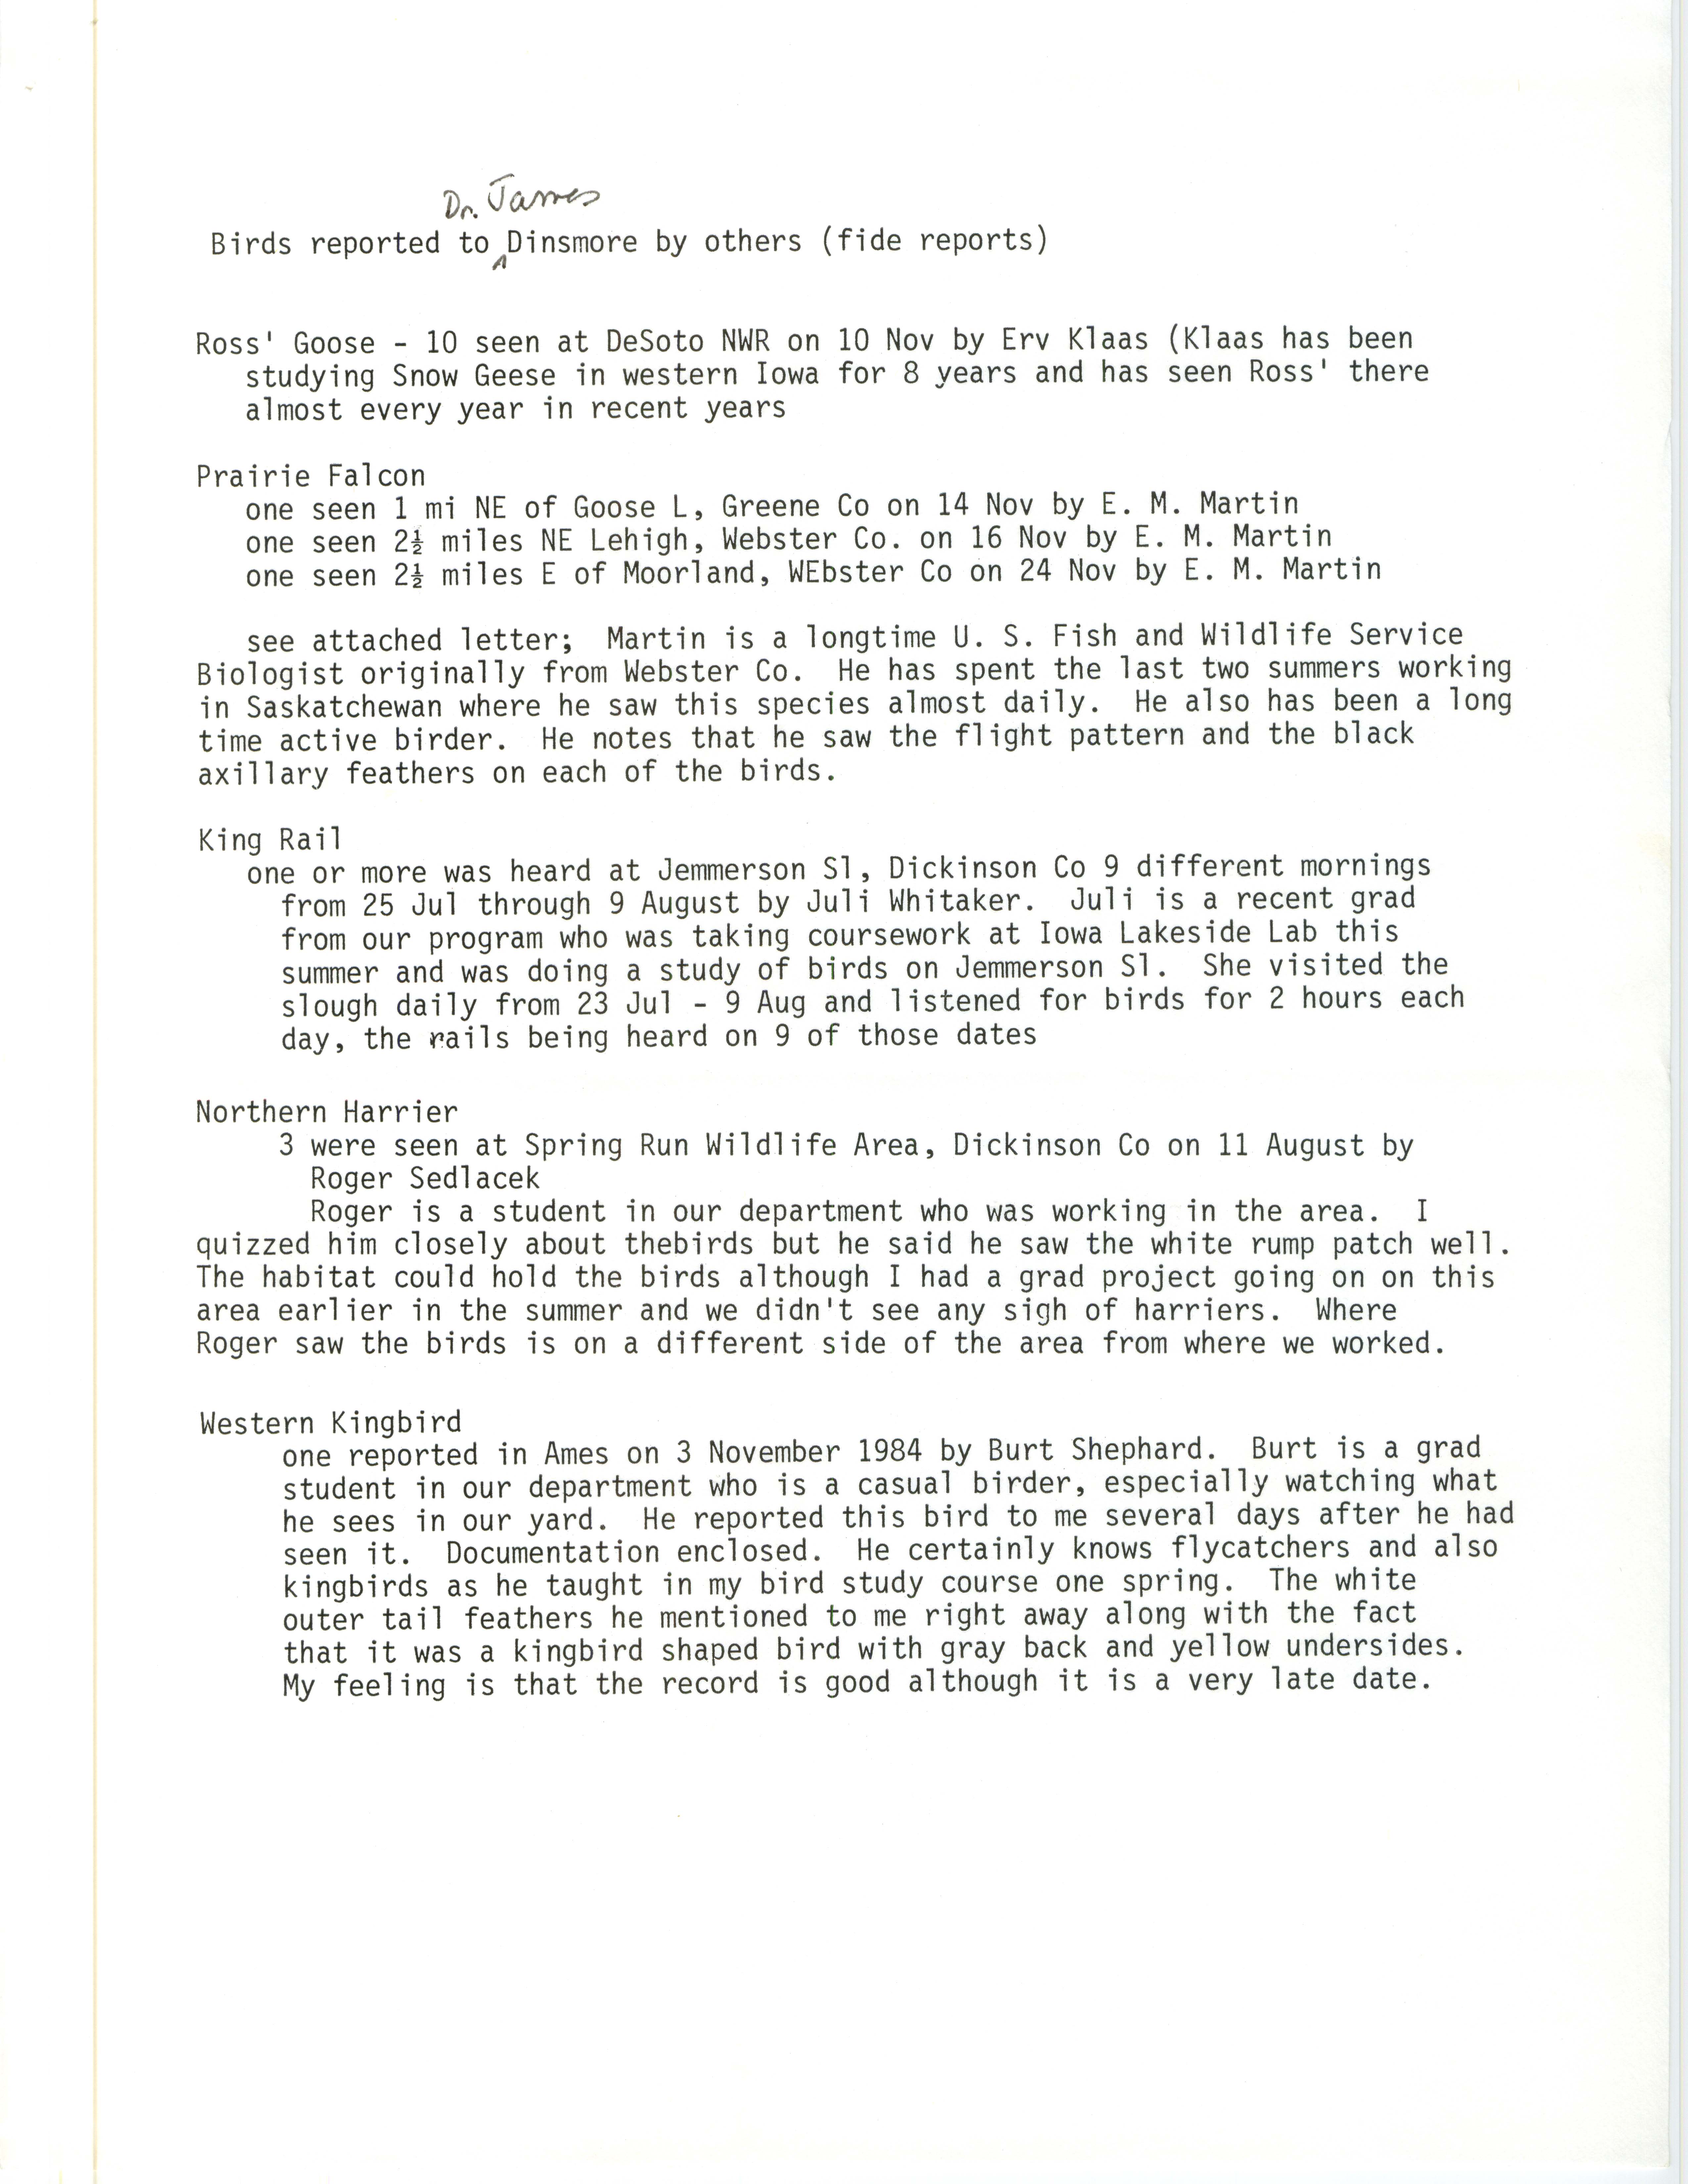 Birds reported to Dr. James Dinsmore by others (fide reports), fall 1984